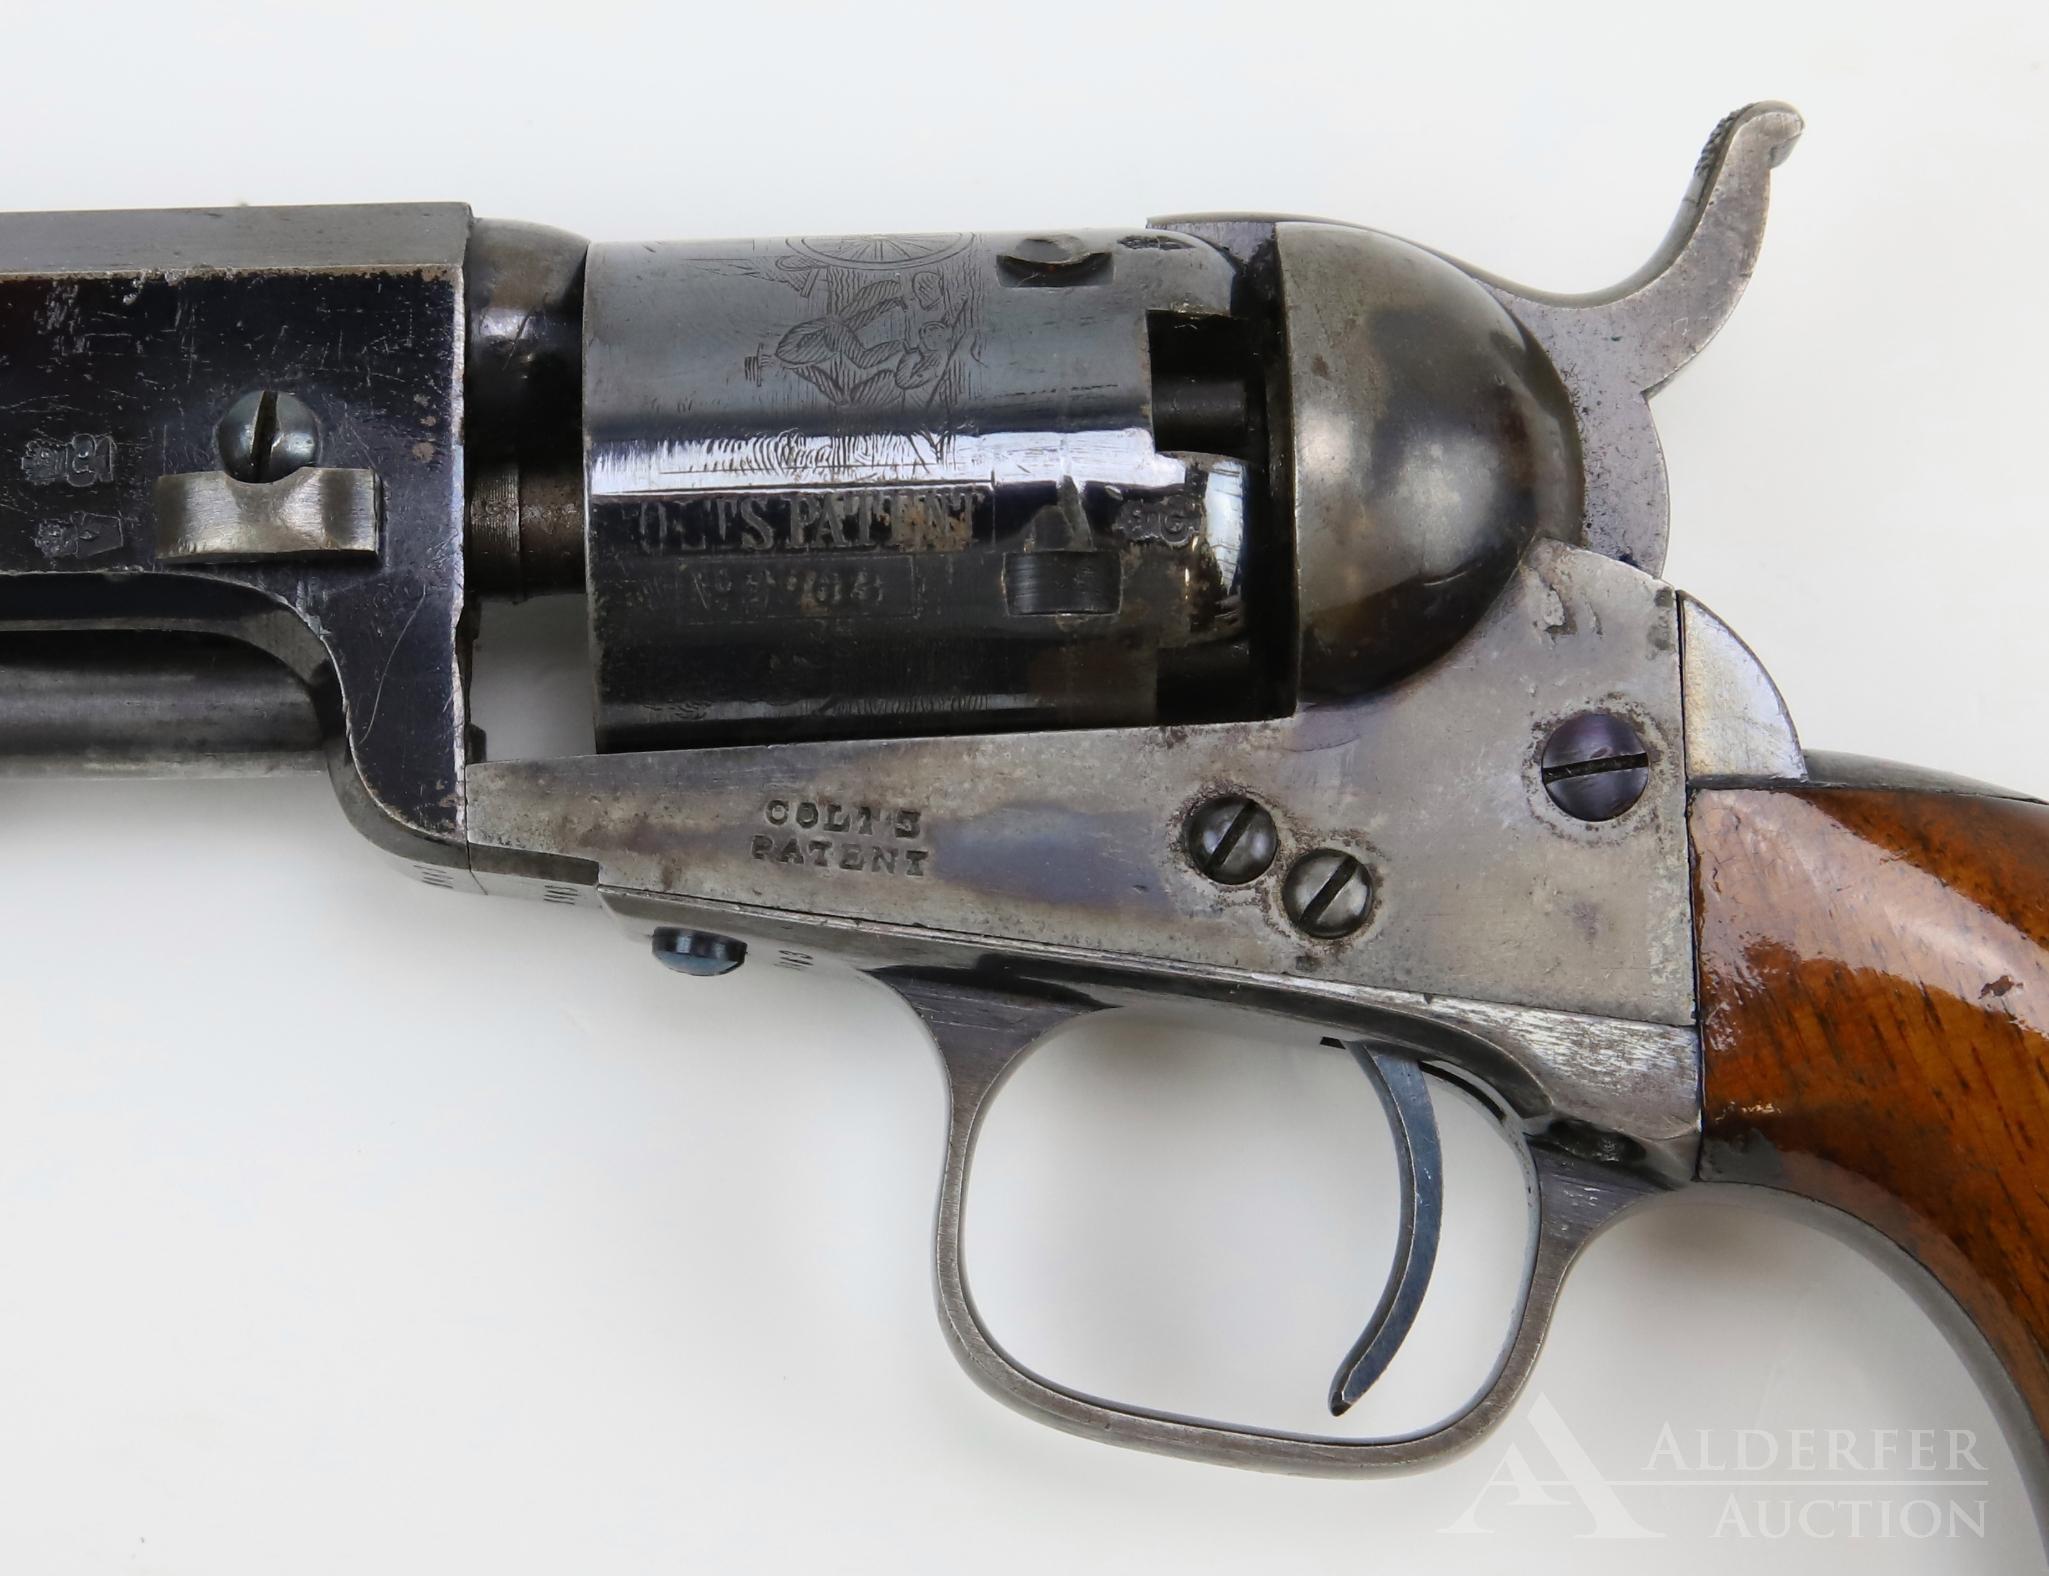 Cased Colt (London) Model 1849 Pocket Revolver with Accoutrements